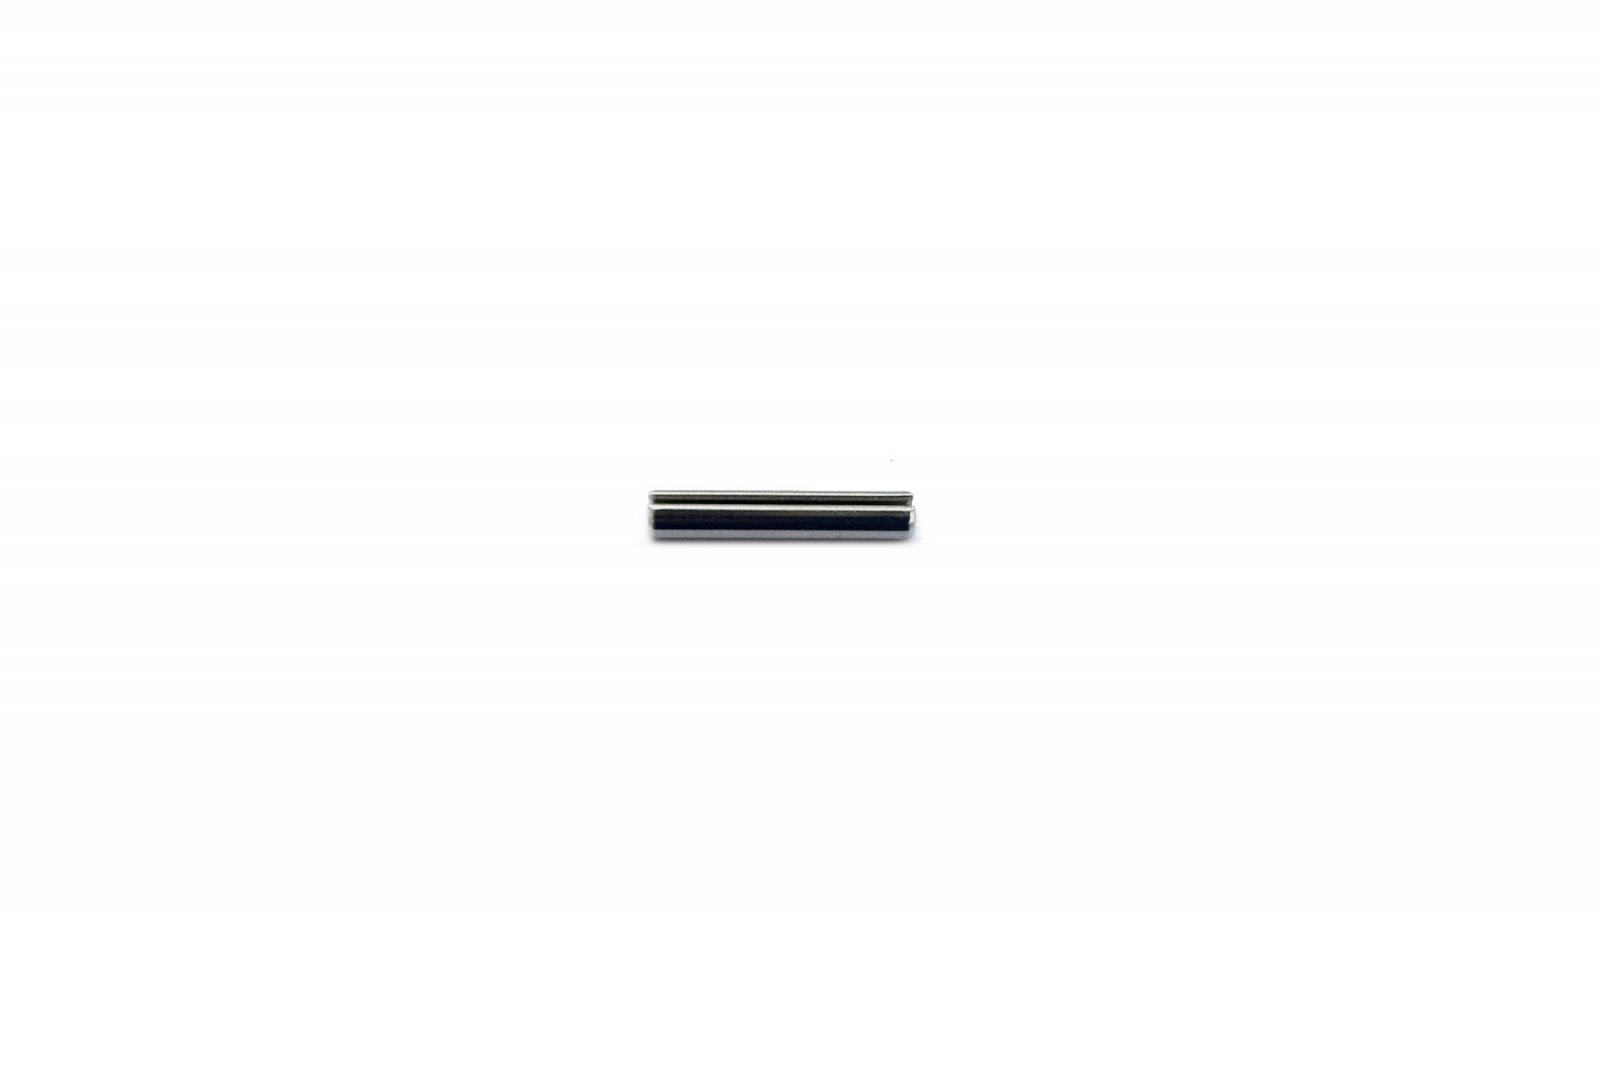 NorthStar™ 1/8" x 7-8" Spring Pin. Part number SHW-015 